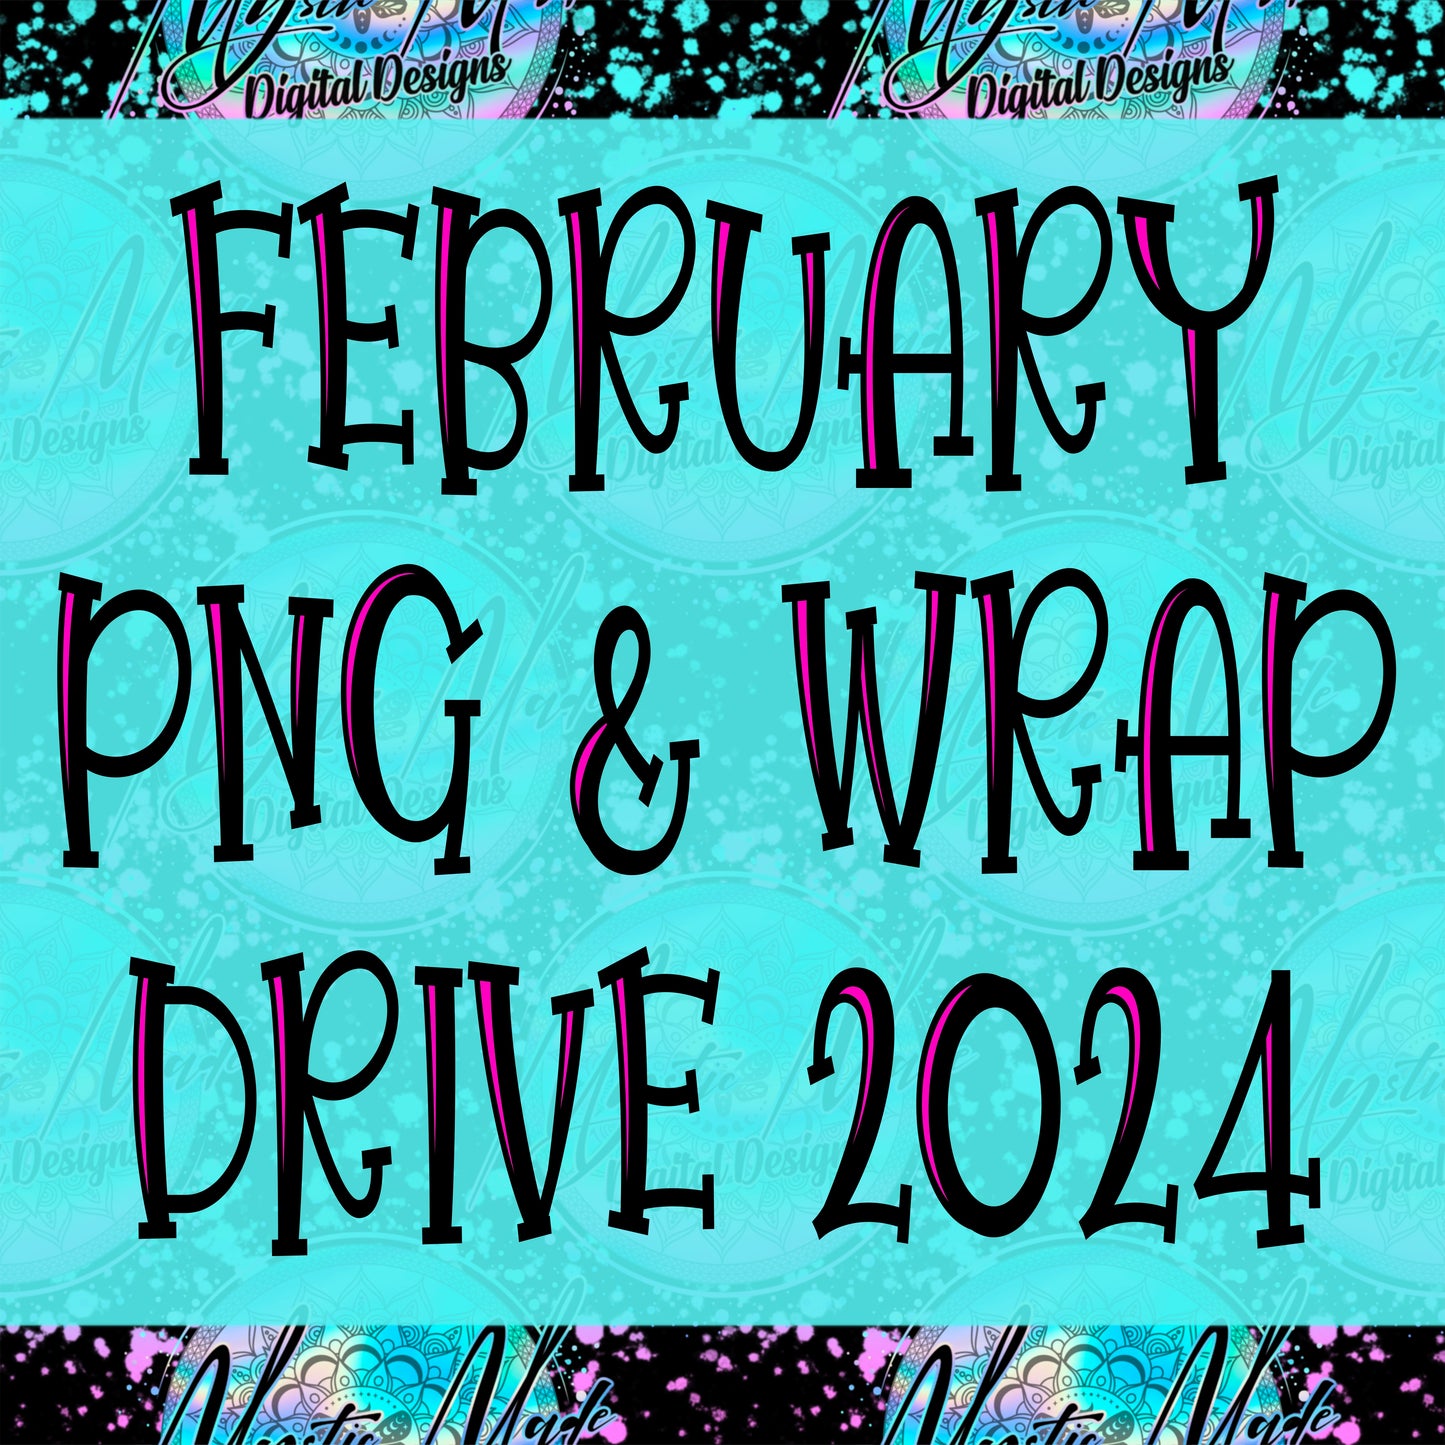 February *PNG & WRAPS* Drive 2024